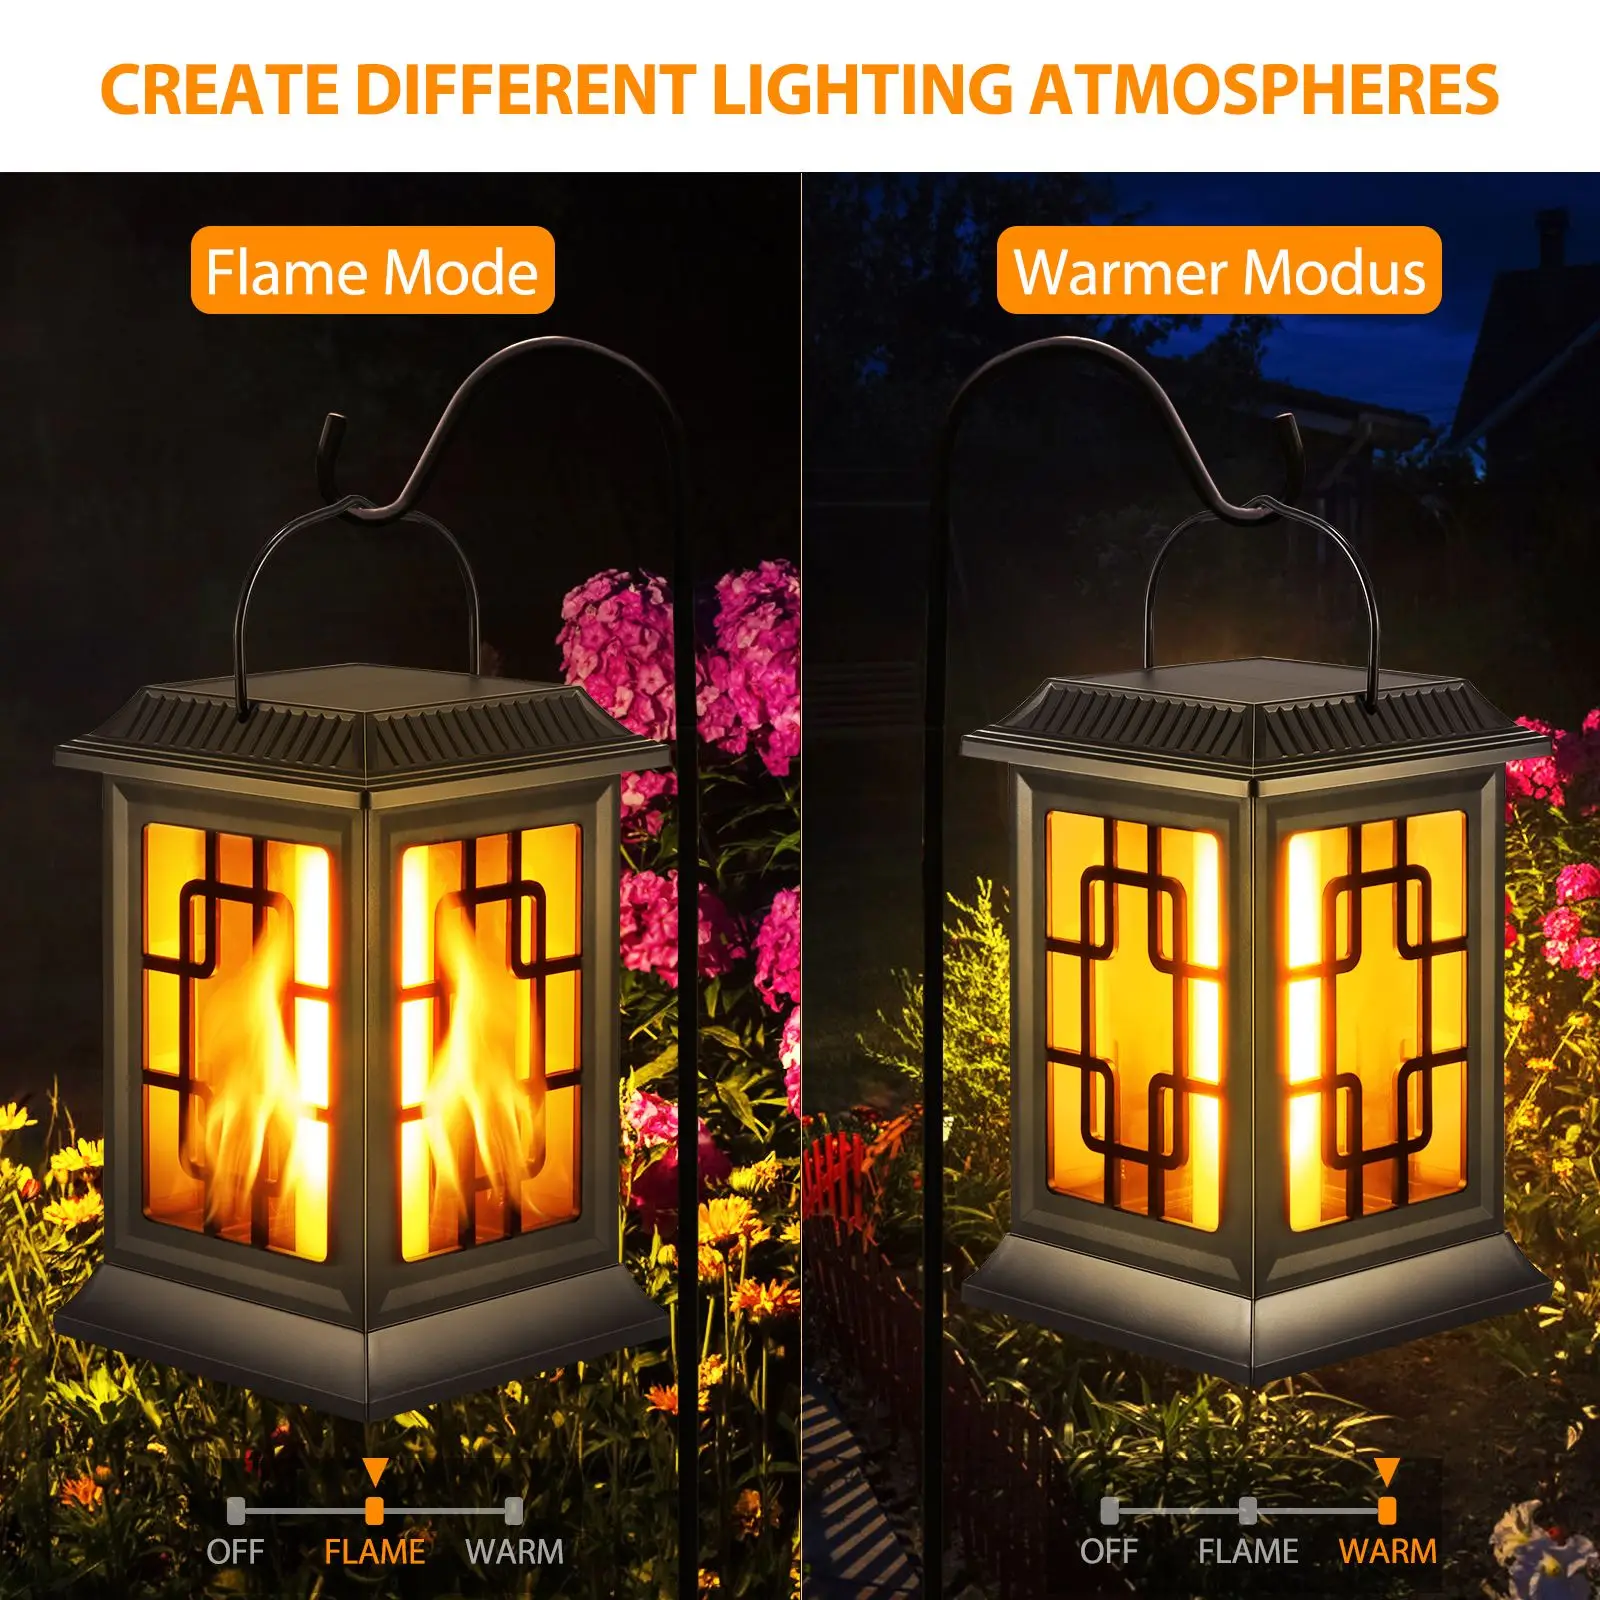 Solar Lantern Light 38LED Waterproof Portable Garden Decor Hanging Lights Outdoor Yard Festival Atmosphere Landscape Solar Lamp 4 cups aromatherapy candles flowers fragrance portable 3 styles for gifts bathroom yoga relaxation sleep atmosphere cabinets